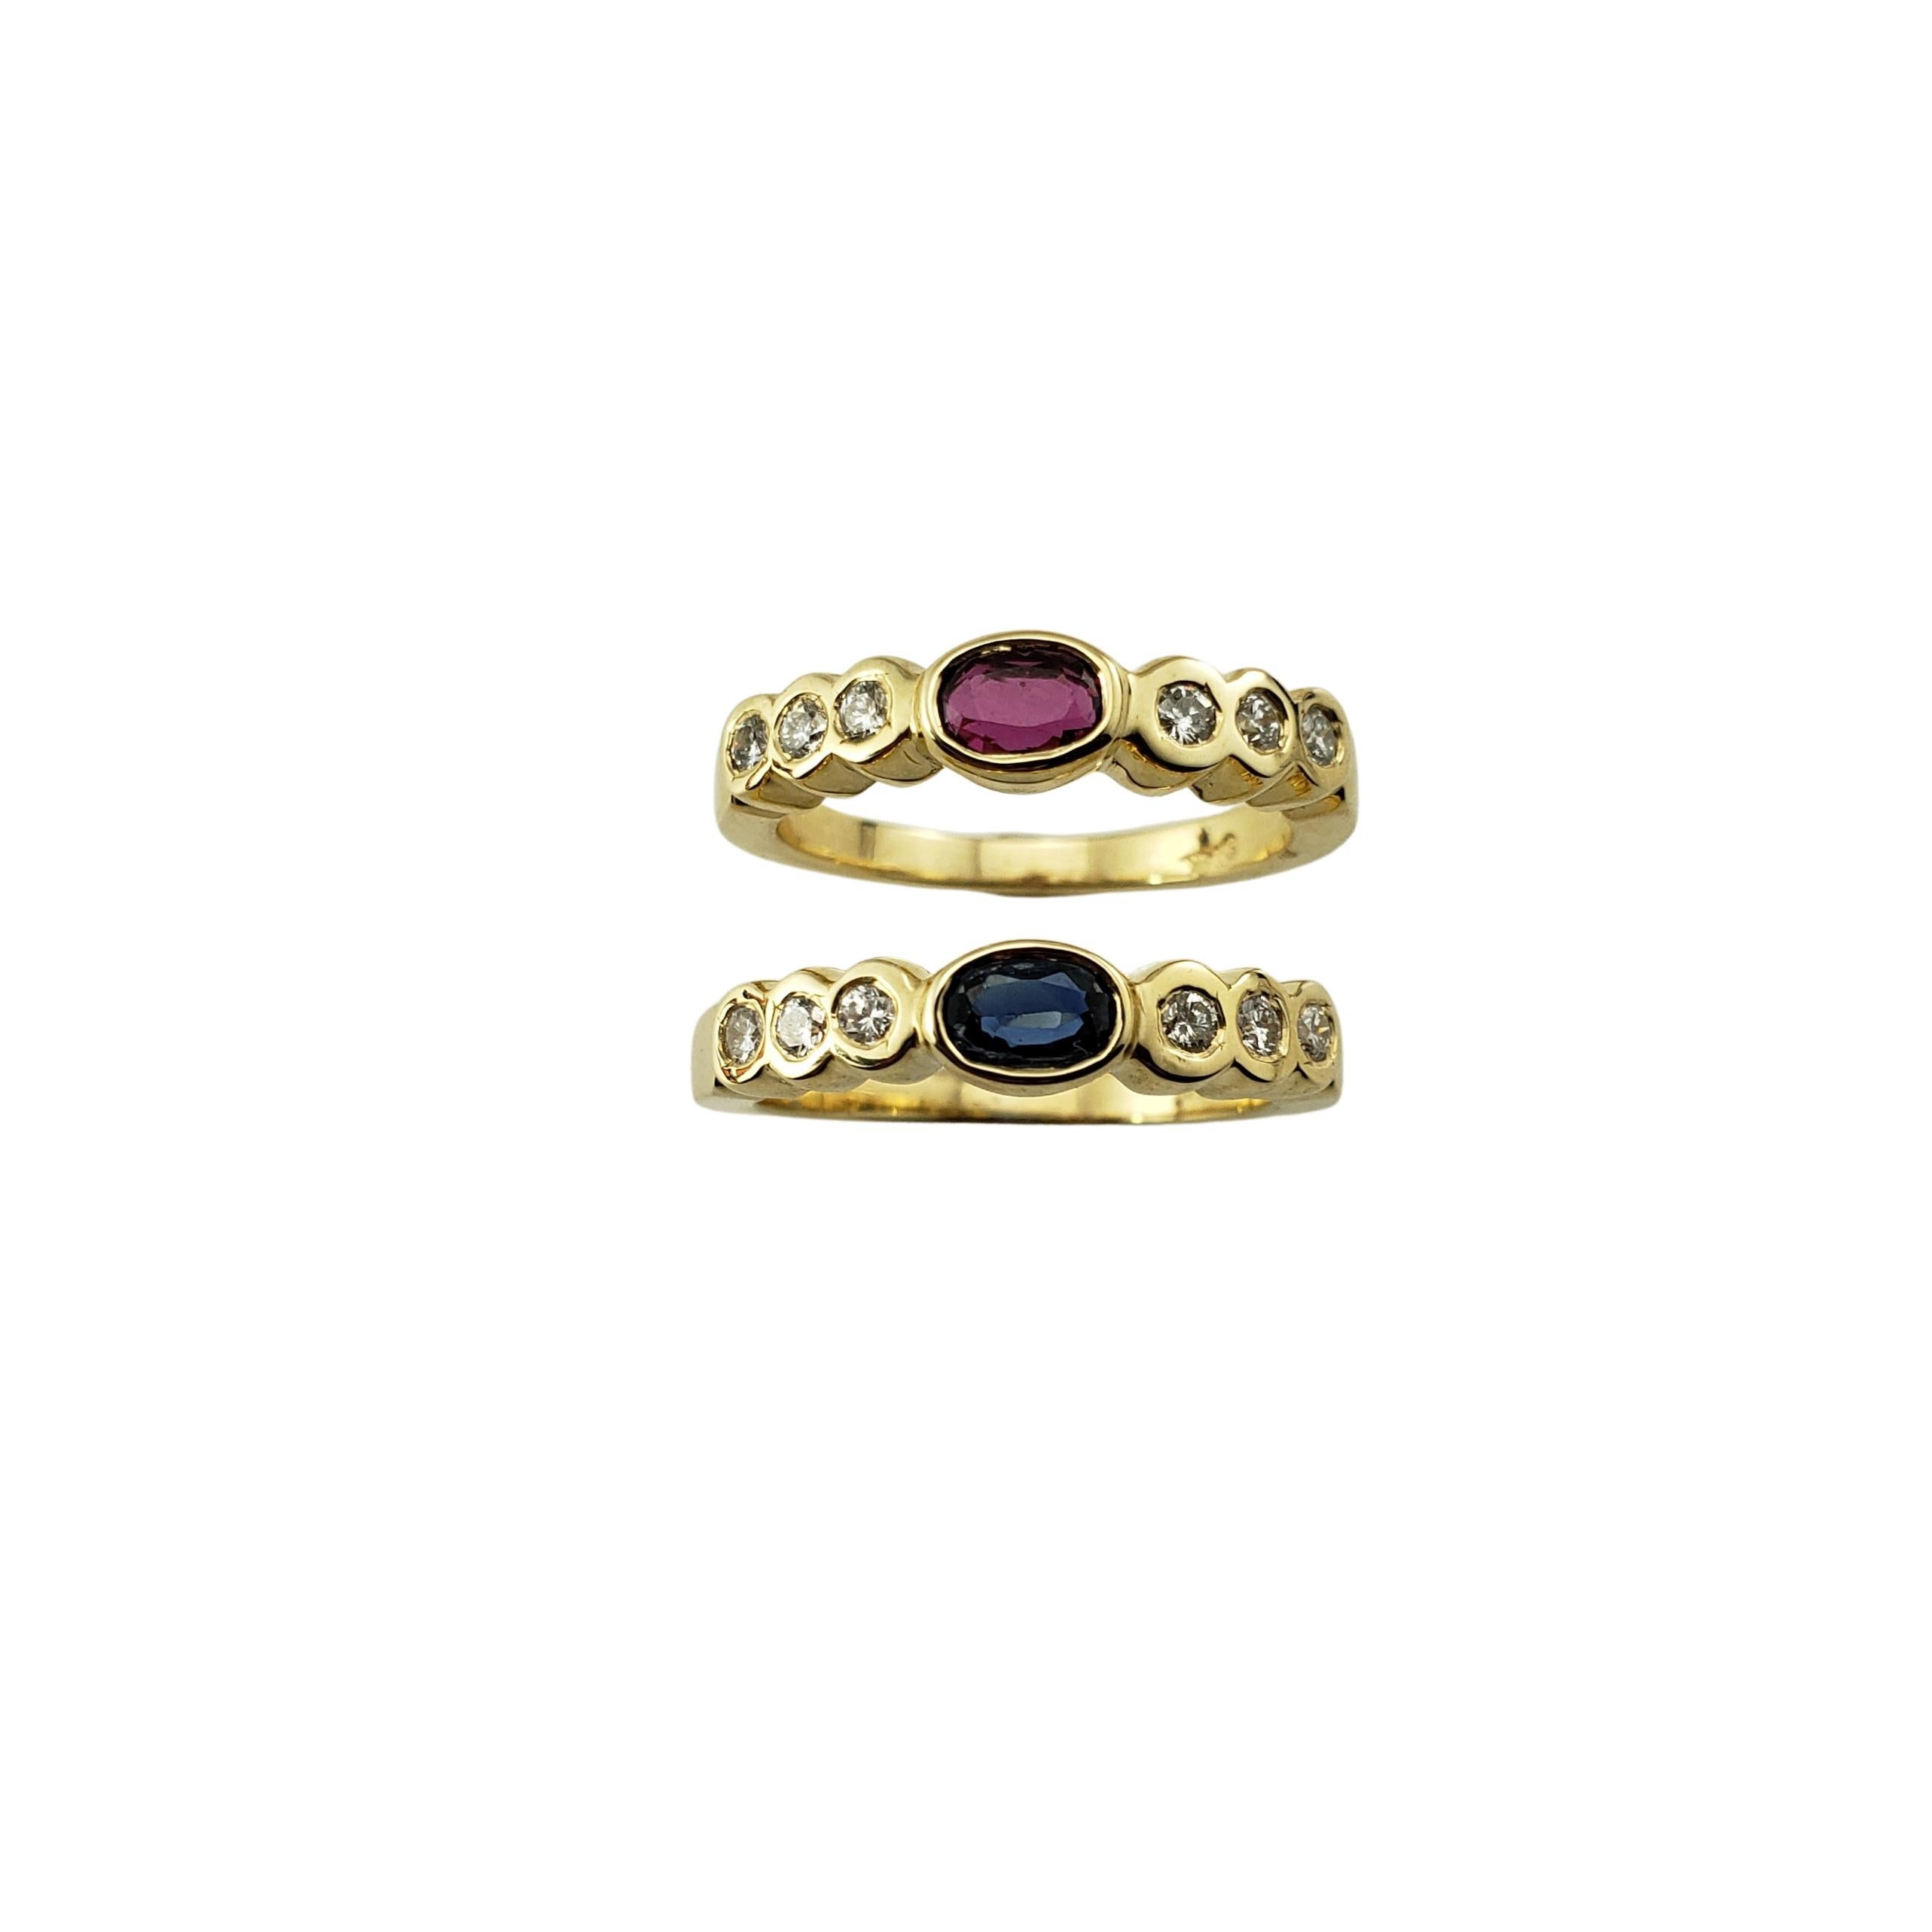 Set of Two Natural Ruby/Sapphire and Diamond Rings. Ruby Size 6, Sapphire 5.75

These lovely ring each feature one oval gemstone (ruby and sapphire, 5 mm x 4 mm each) and six round brilliant cut diamonds set in classic 14K yellow gold.  Width of